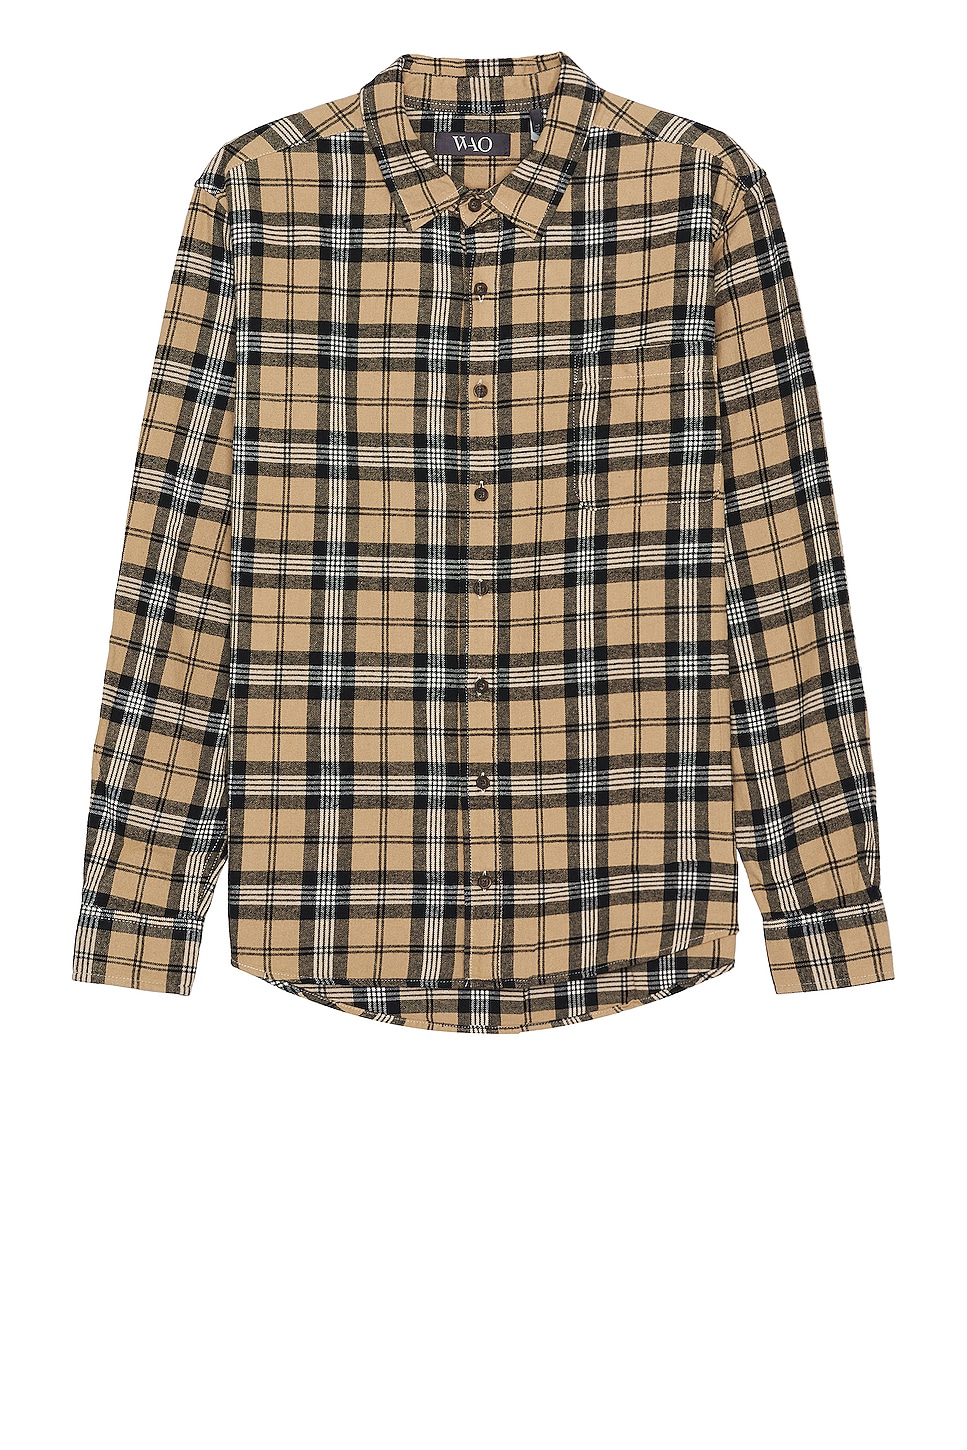 Image 1 of WAO The Flannel Shirt in beige & black